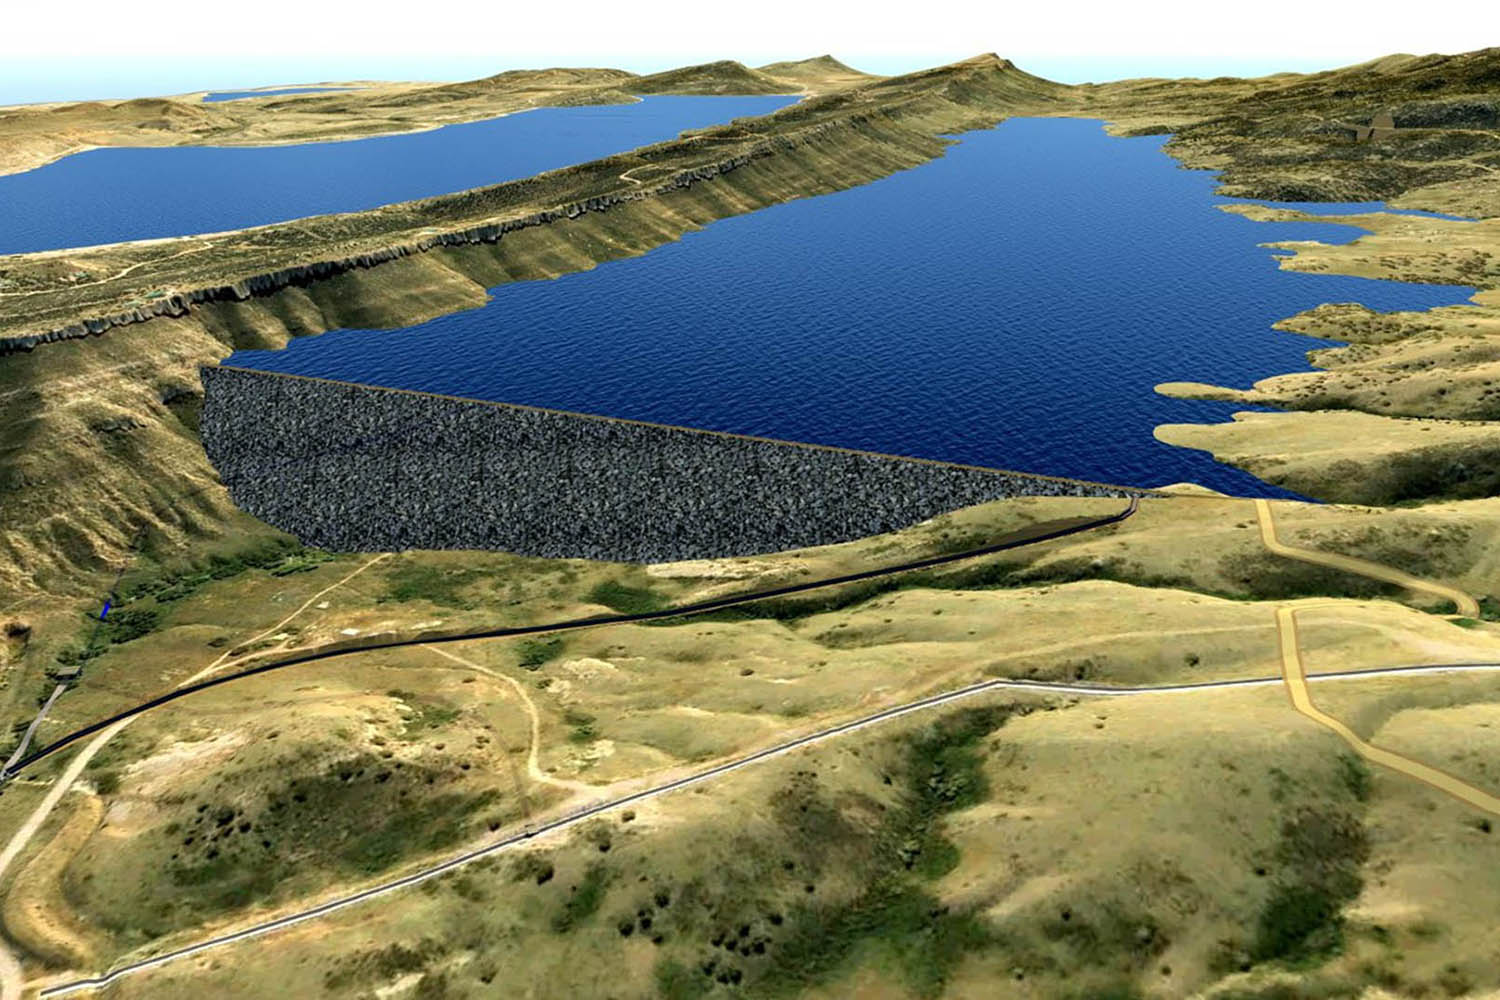 Rendering of a full Chimney Hollow Reservoir with Carter Lake in the background.